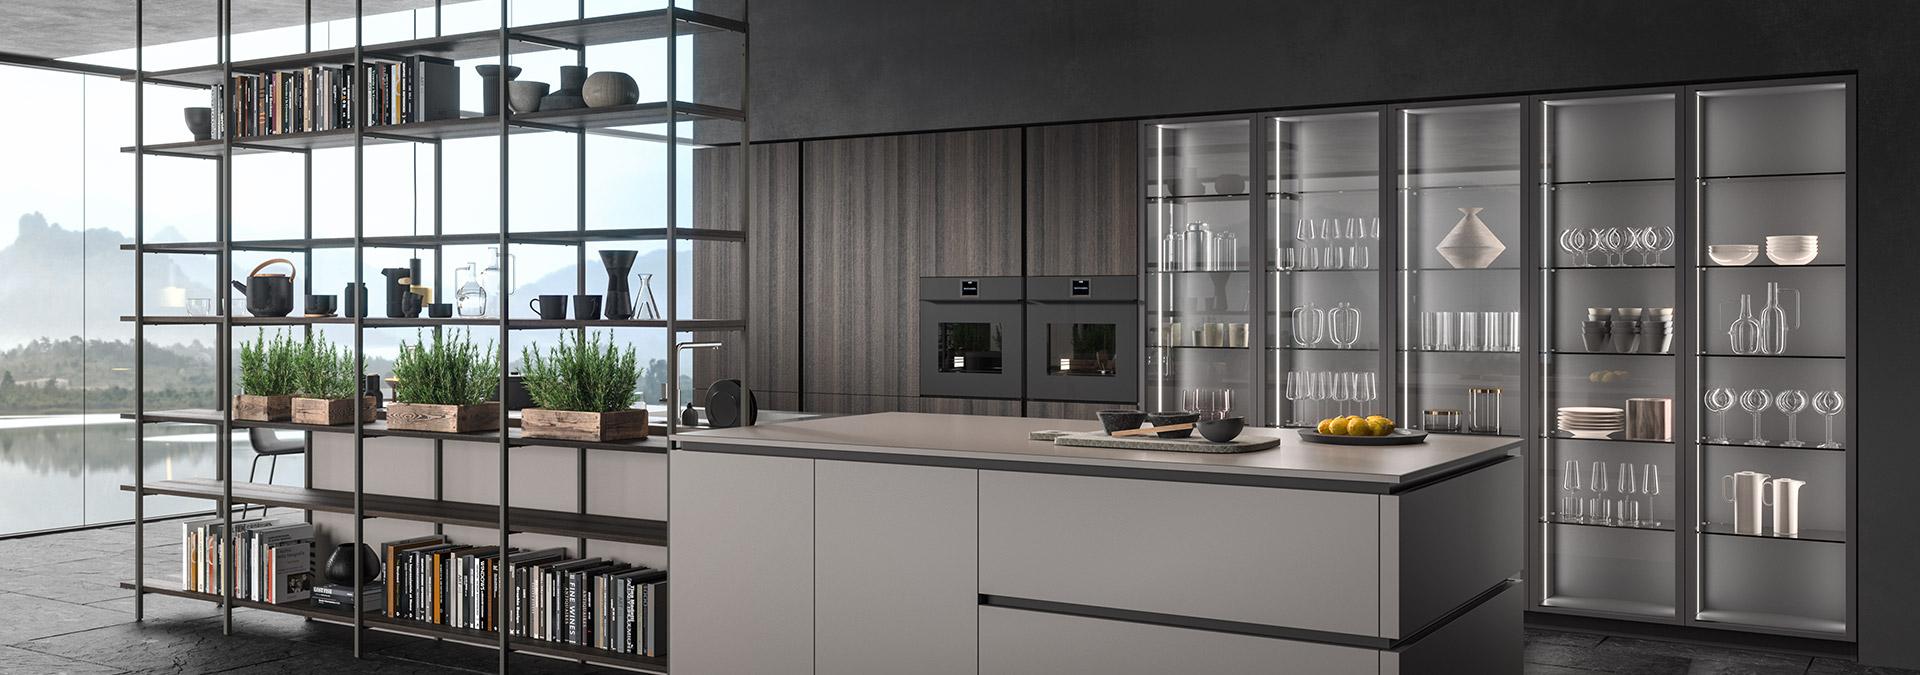 HC.08 THE INTEGRATED FURNITURE SYSTEM FOR THE WHOLE KITCHEN ENVIRONMENT